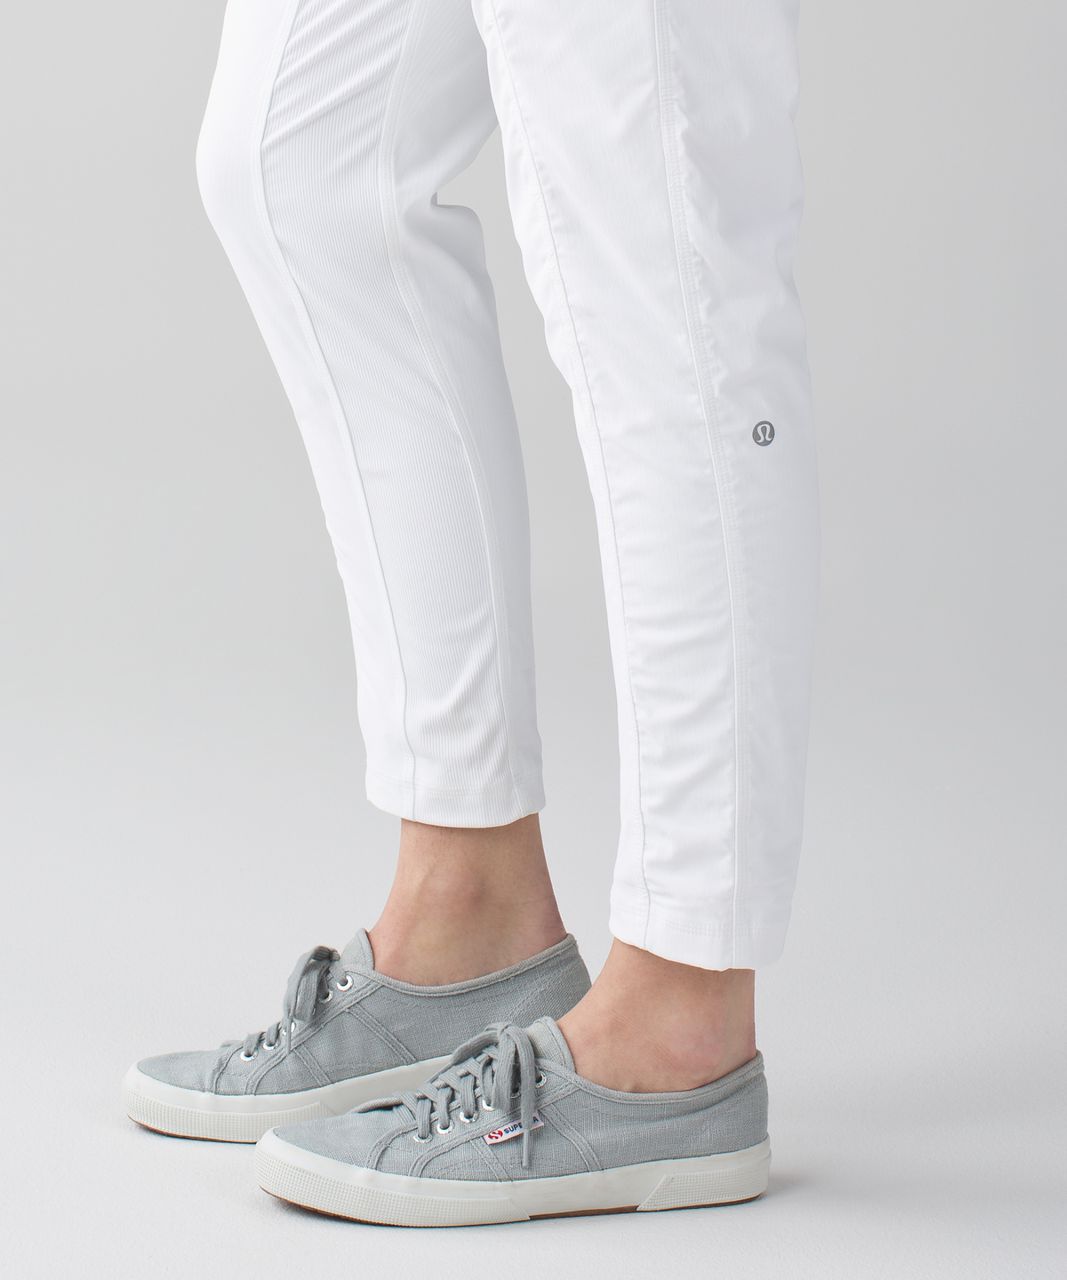 Lululemon Street To Studio Pant II *Lined 28" - White (First Release)